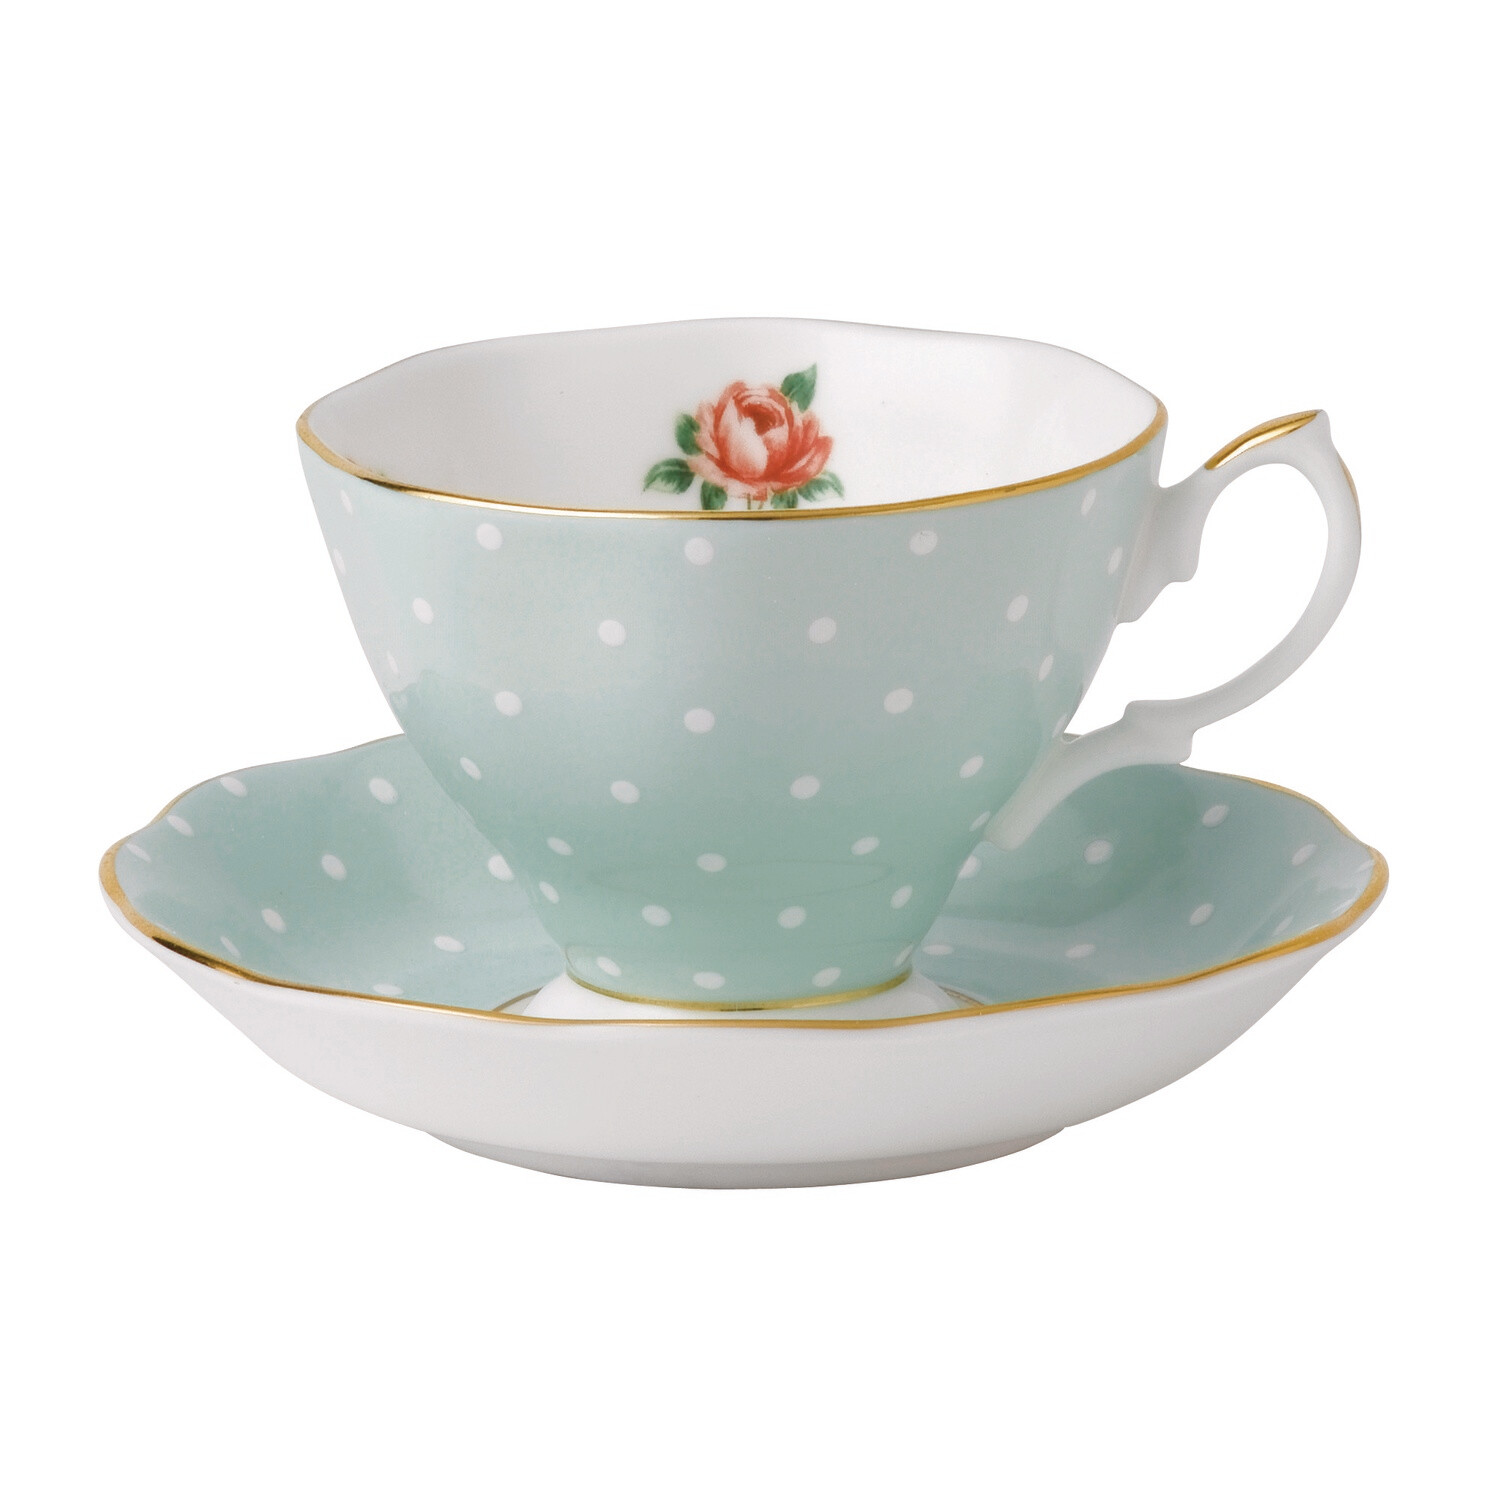 Polka Rose Cup and Saucer